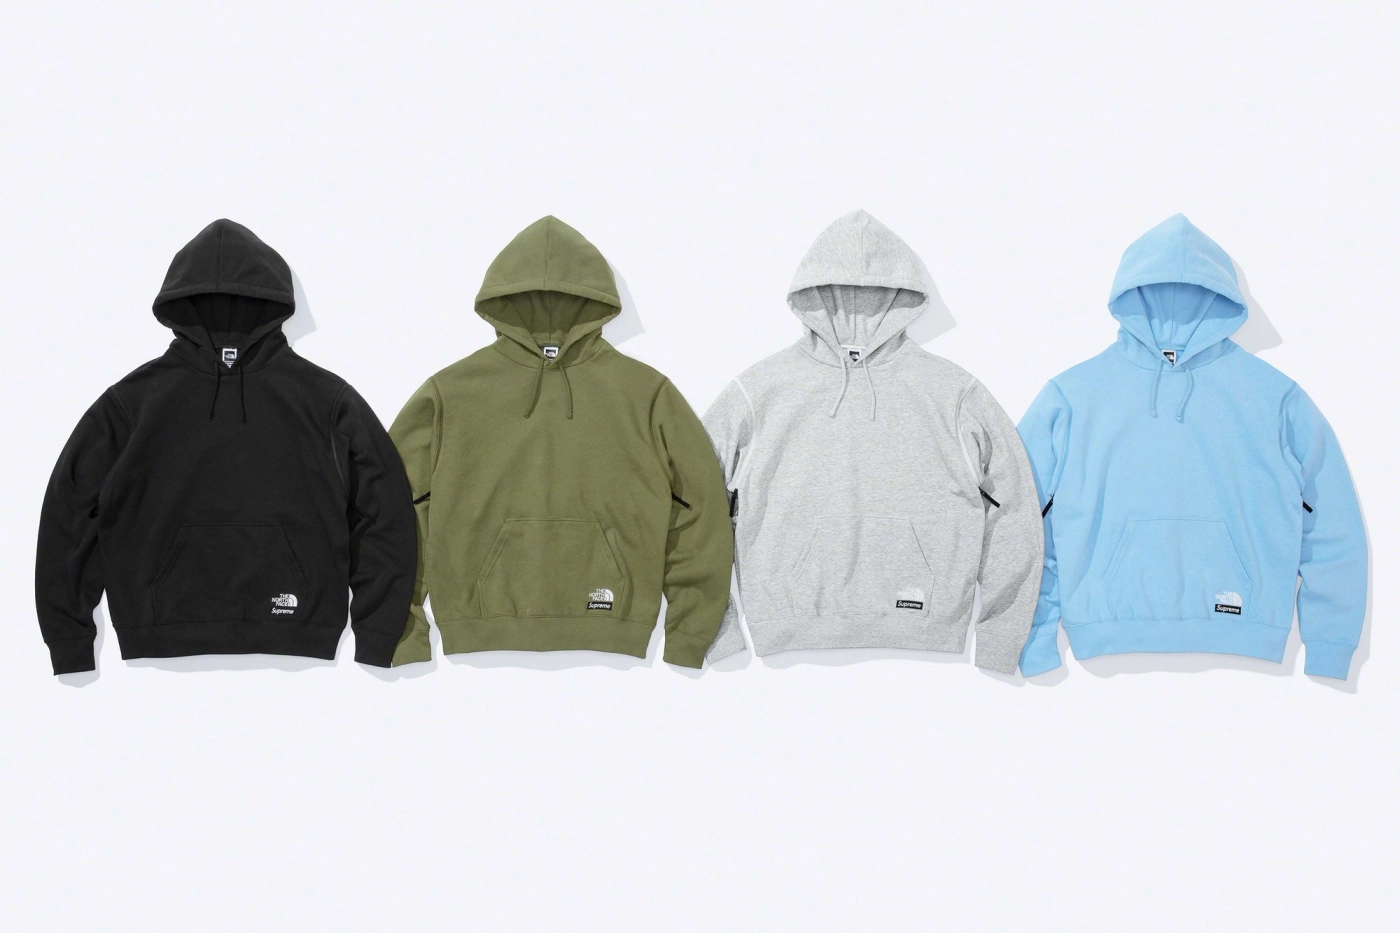 Supreme The North Face Convertible HoodesizeL